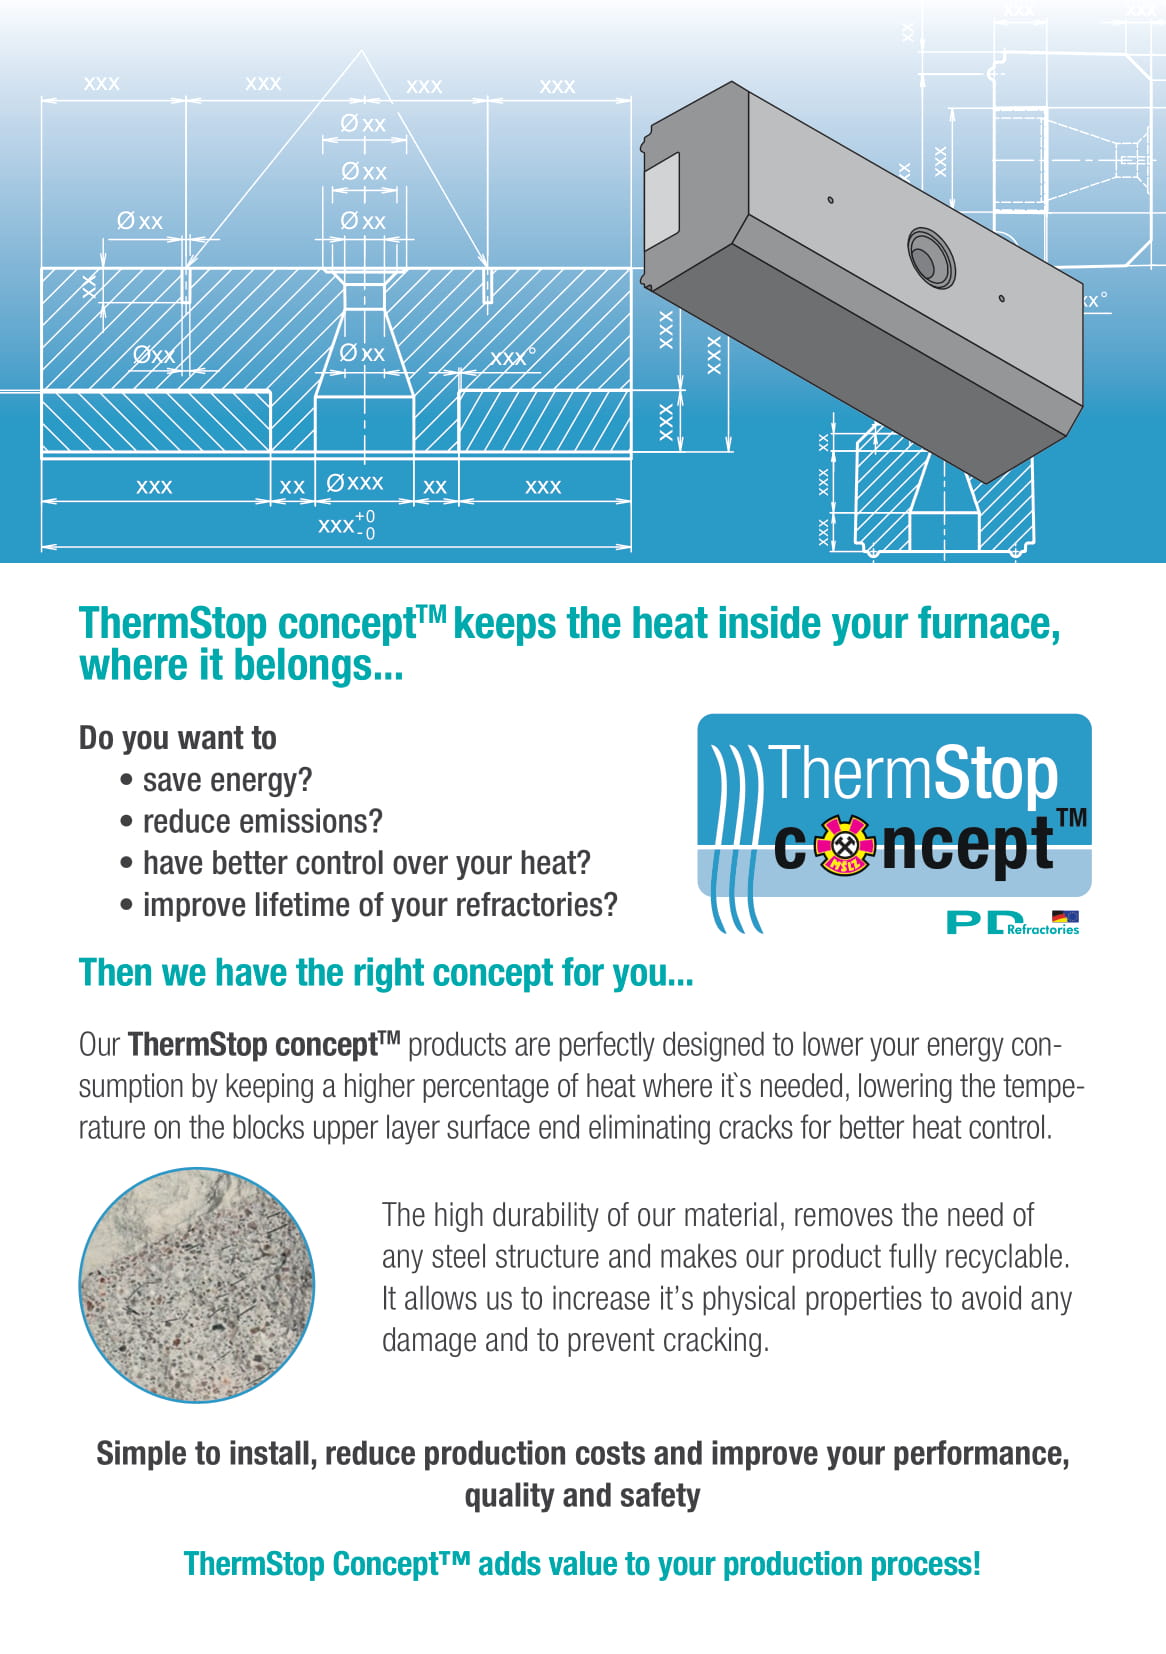 ThermStop Concept™